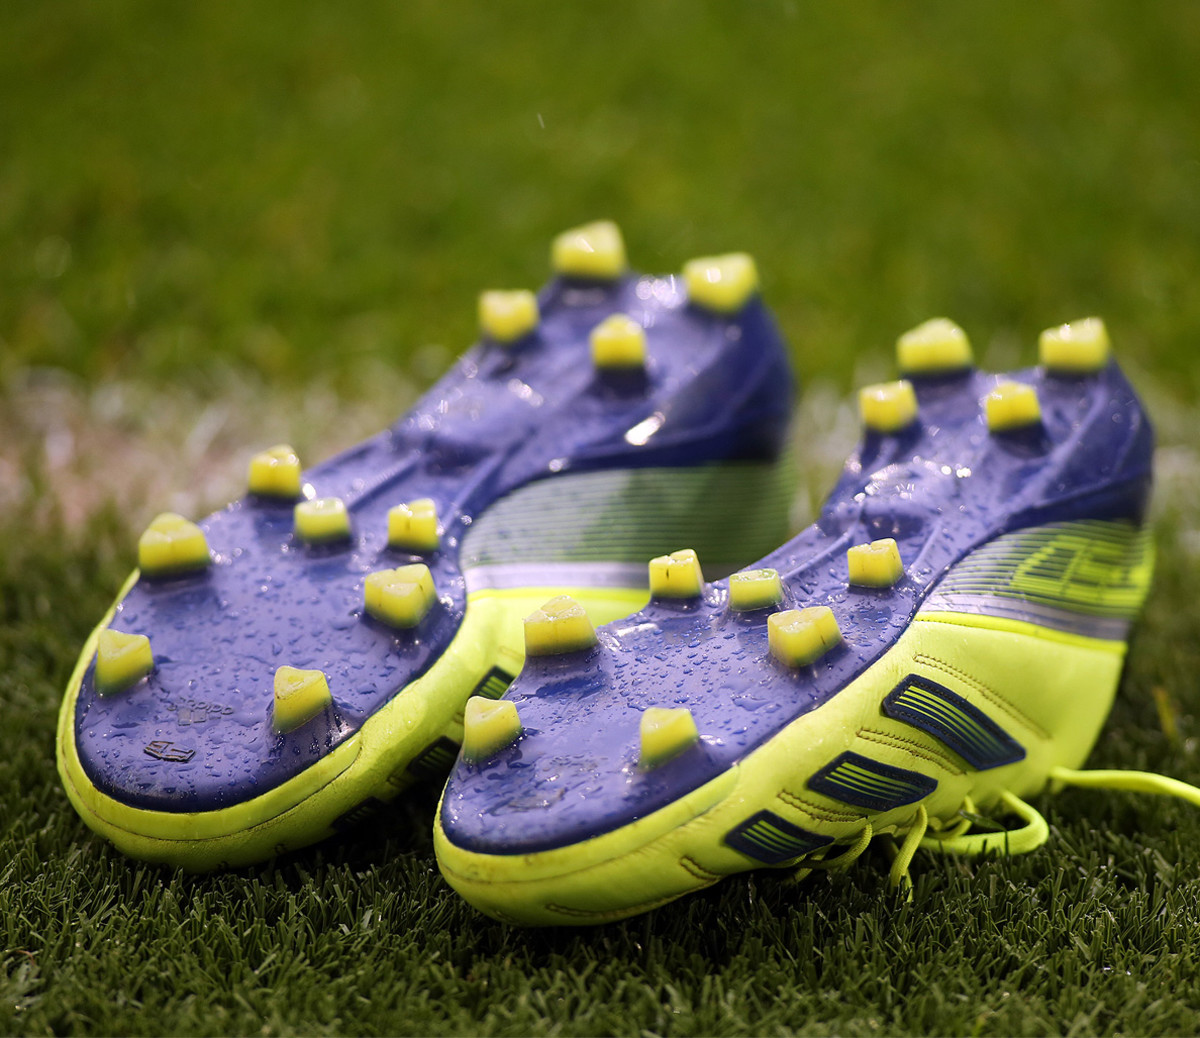 Top 10 Best turf soccer shoes | With Beginner guide